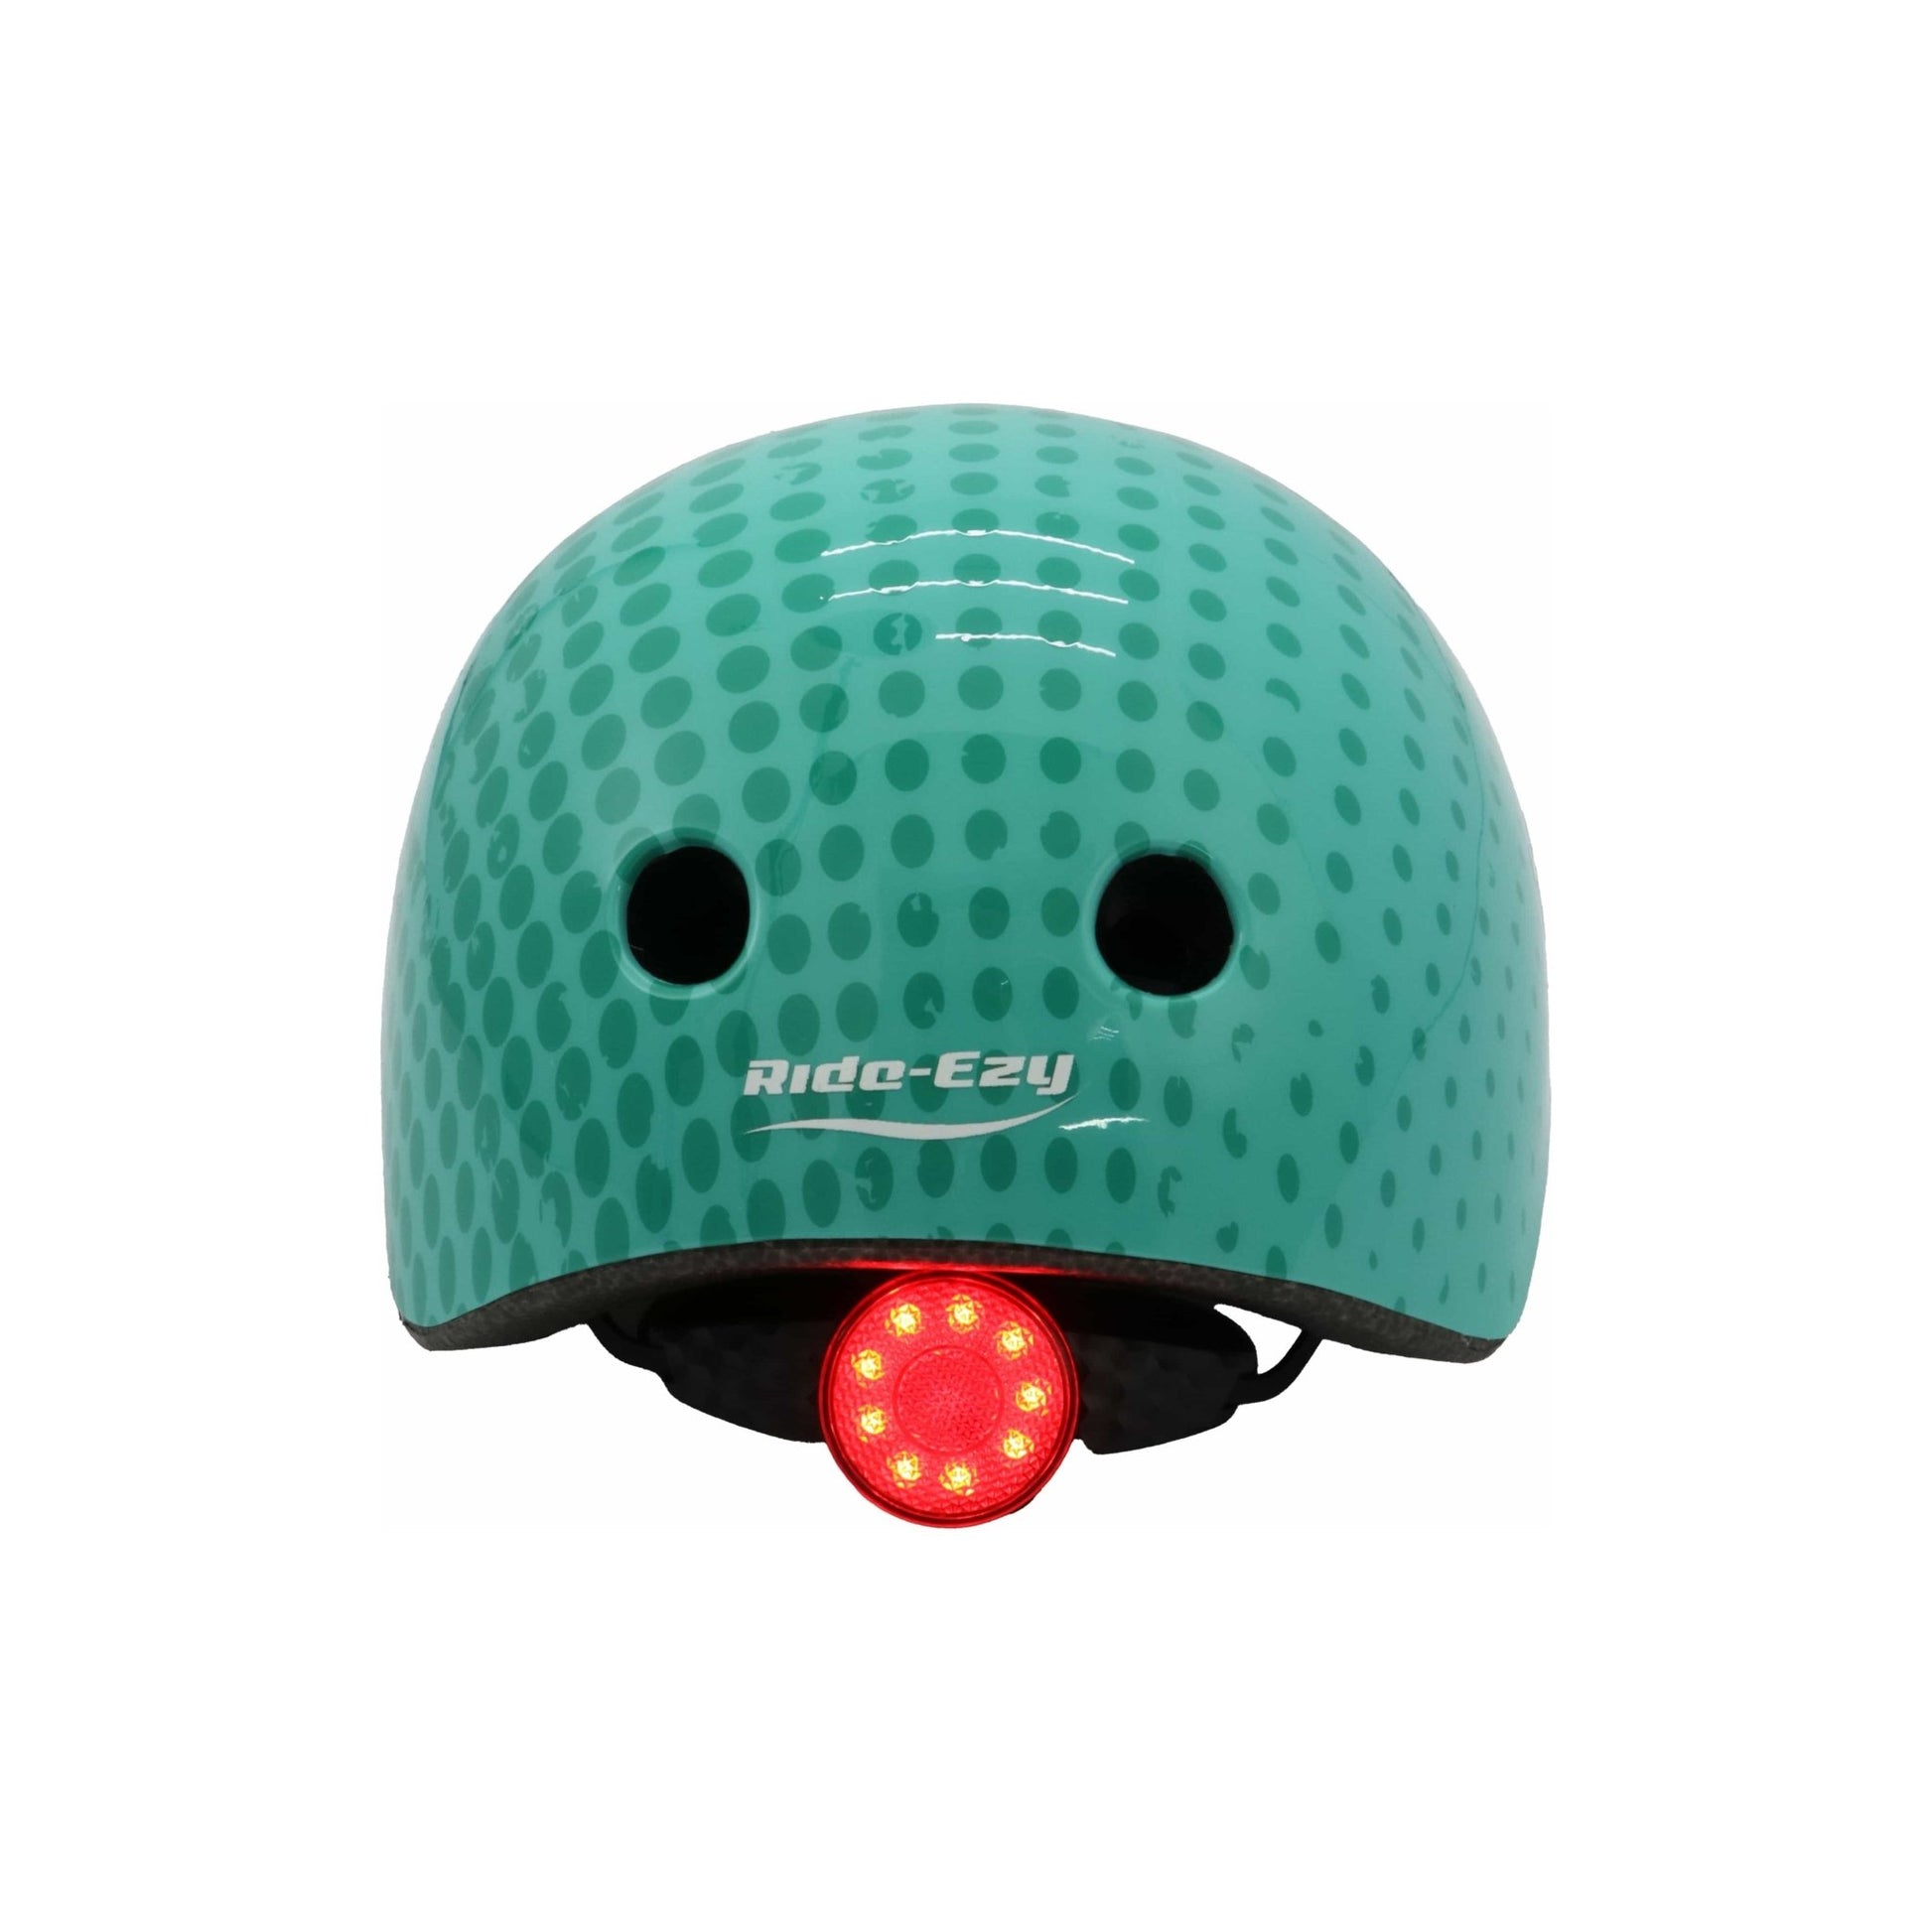 Ride-Ezy Hector 48-53cms Kids Helmet - Woodland Green rear with safety light